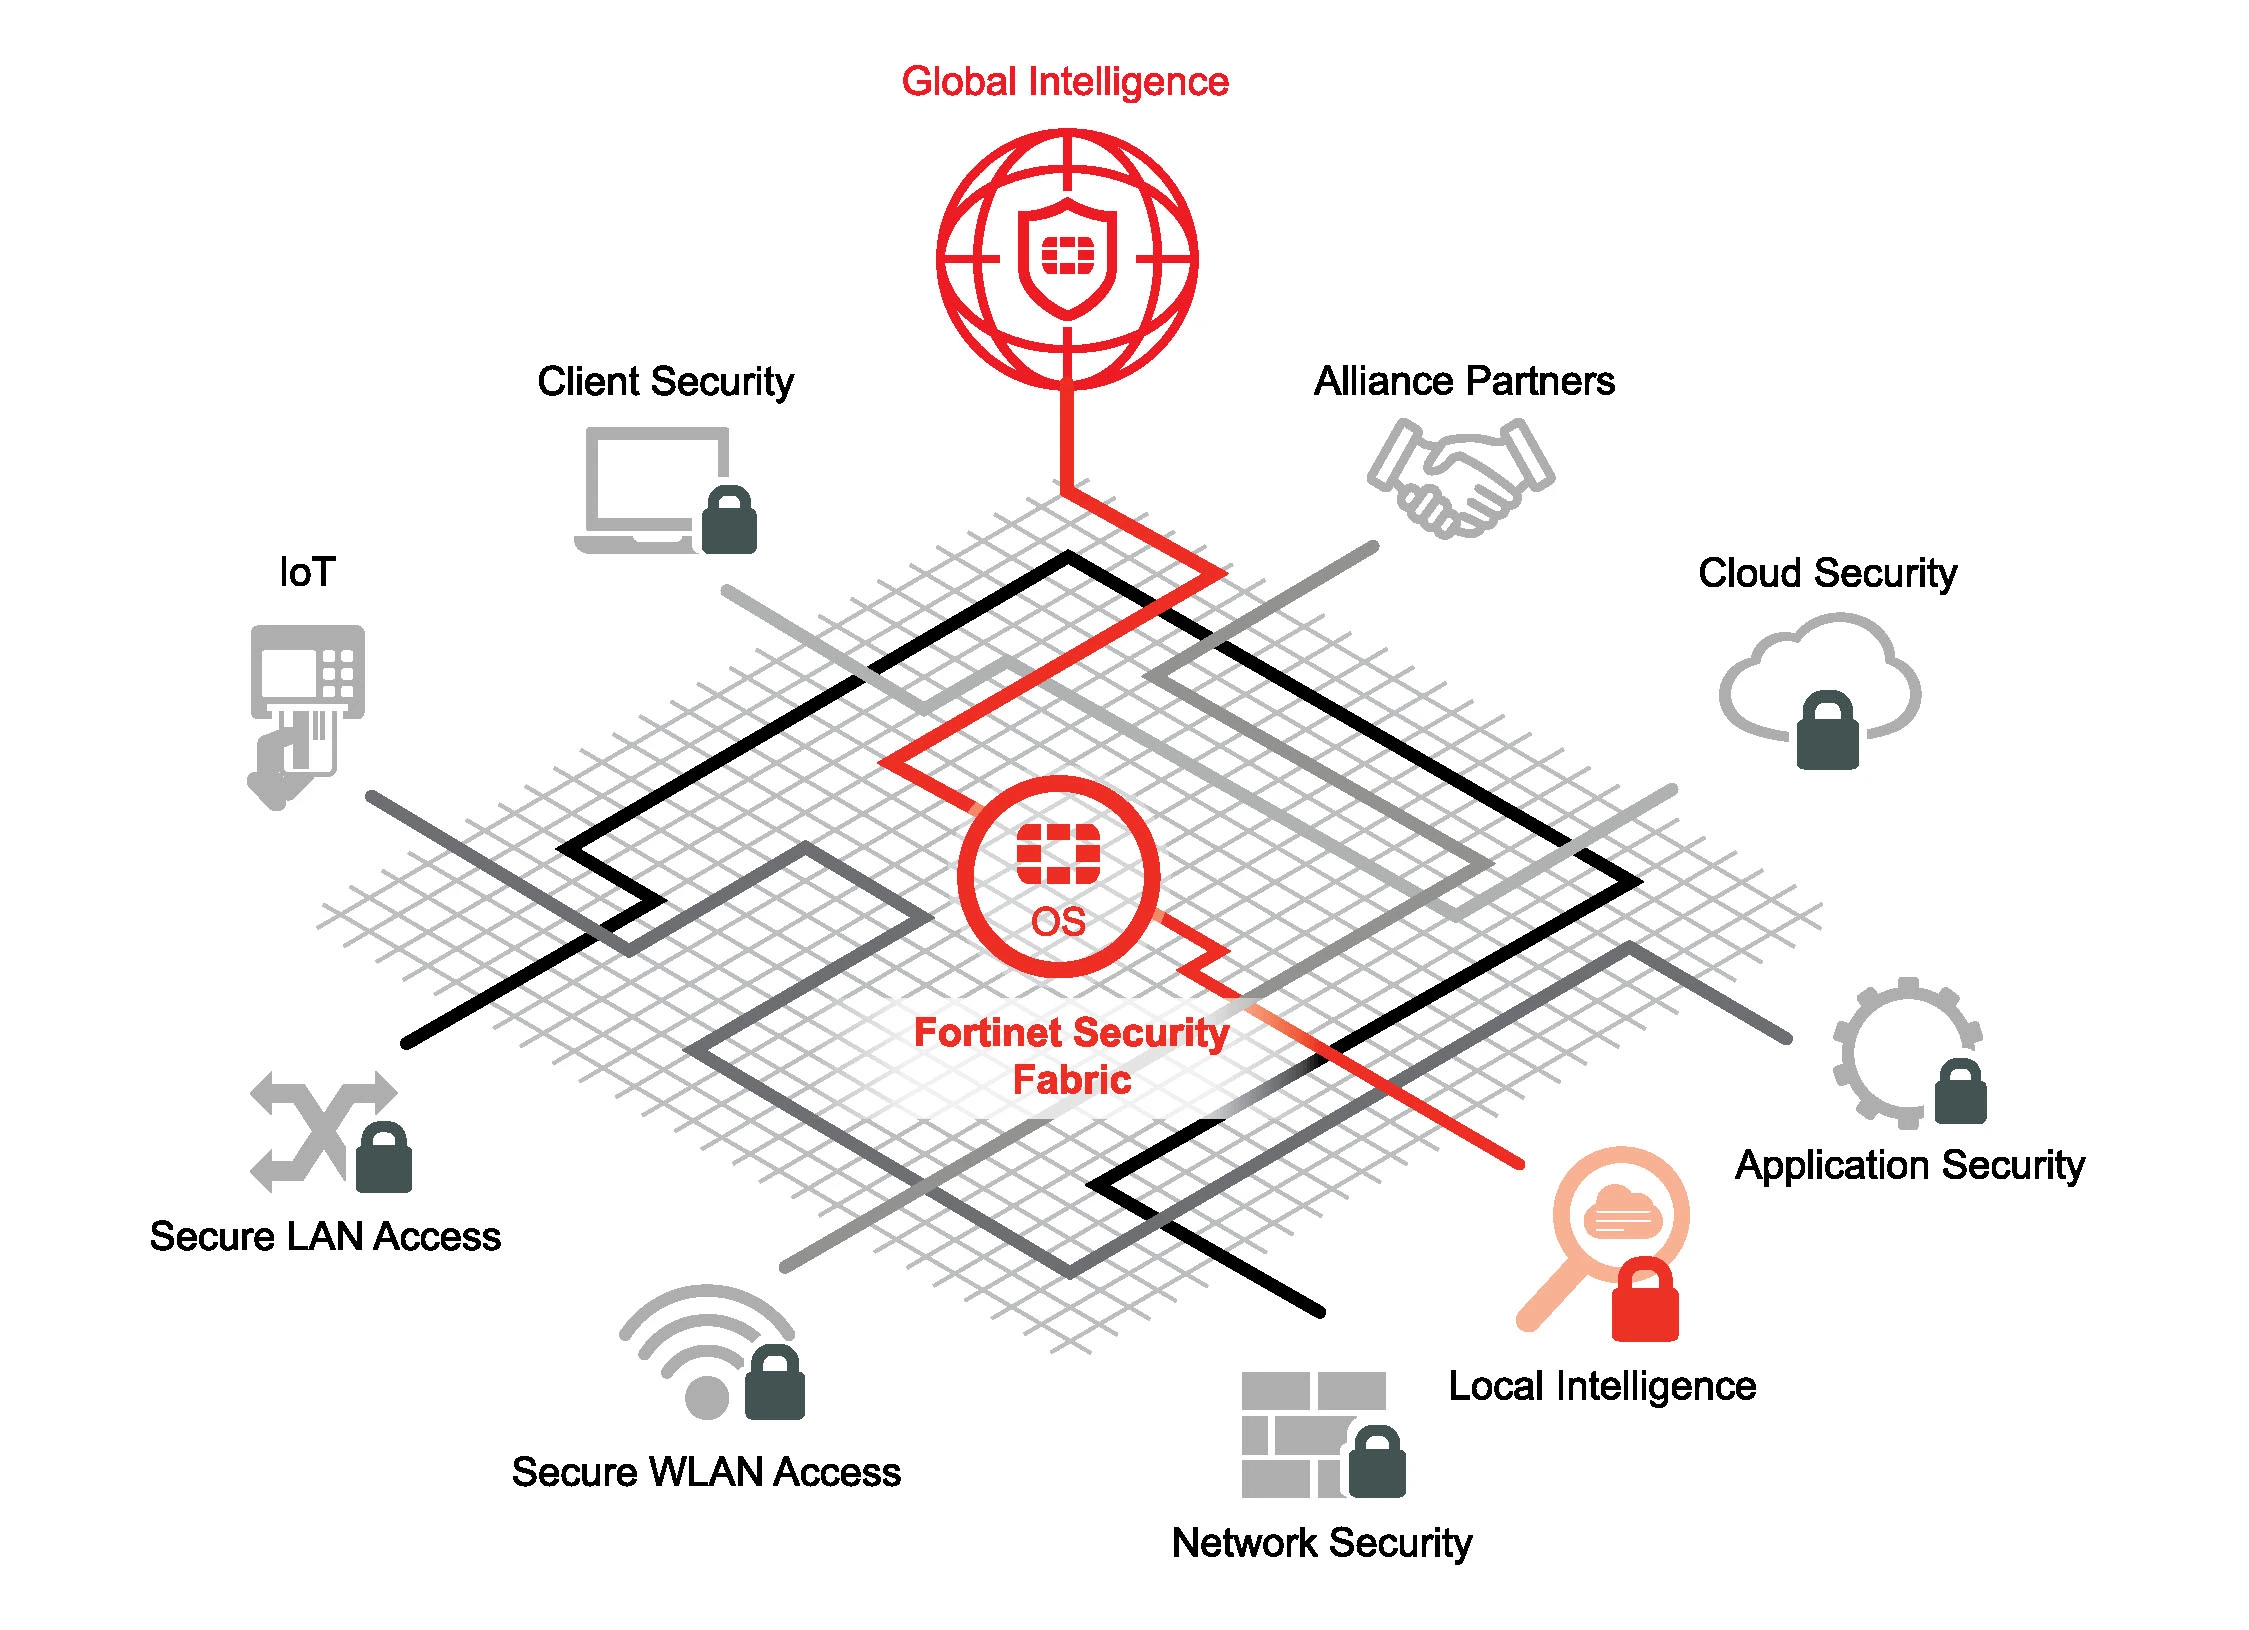 Fortinet Security Fabric, Cybersecurity Solution by ACCESSYSTEM® Technologies Inc - Digital Transformation, IT, IoT & AI Solution & Services.